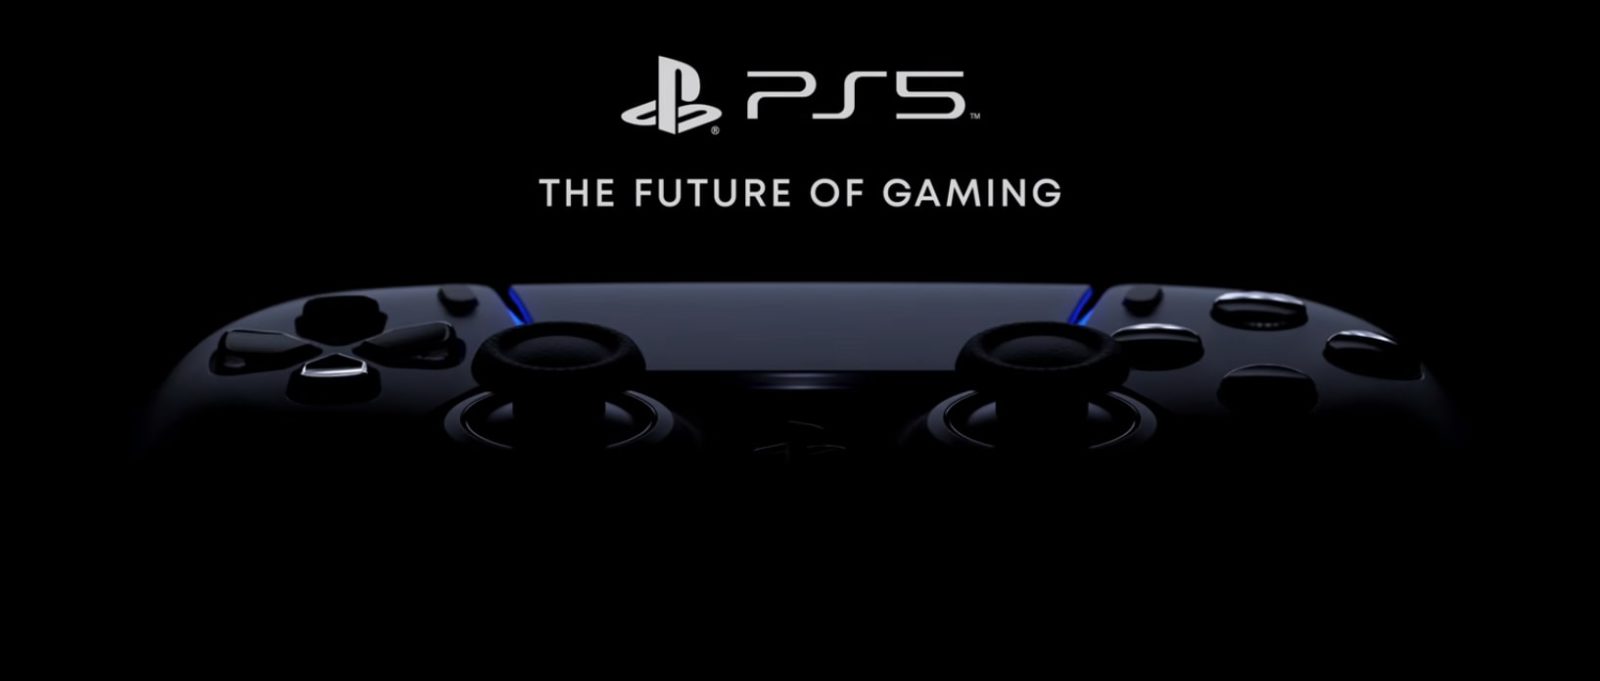 Screenshot 2076 1600x681 1 - LIVE STREAM : Playstation 5 Launch Event [FINISHED]